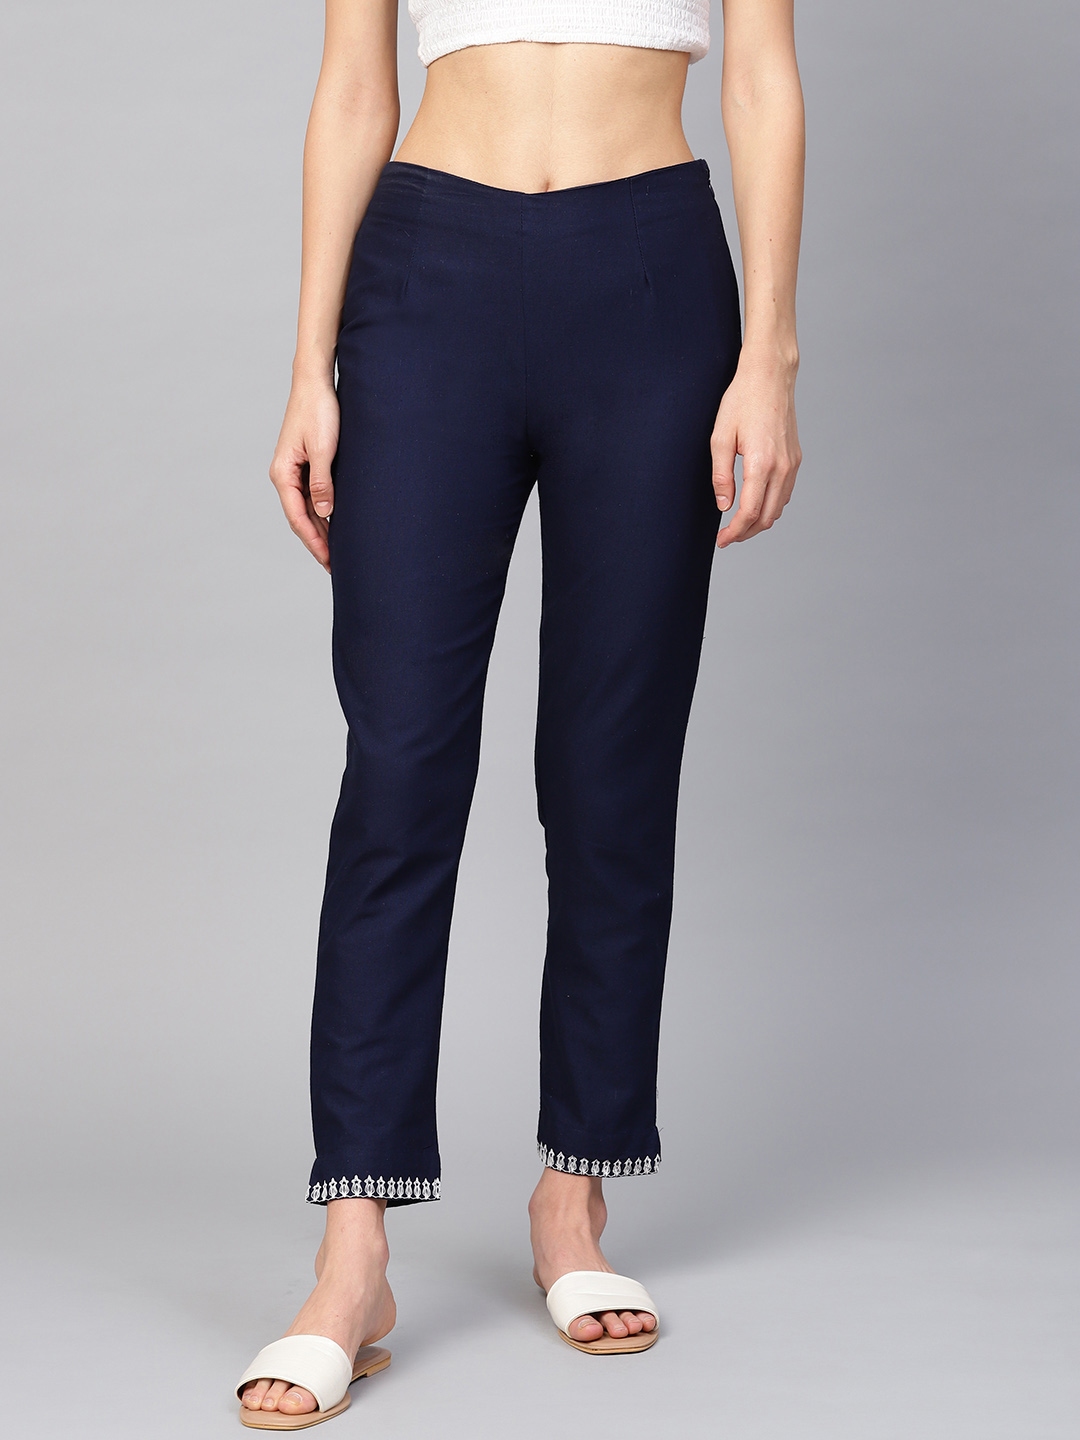 Buy Navy Blue Trousers for Womens at Rs 249 Best Pajama online in India   THALASI KNITFAB